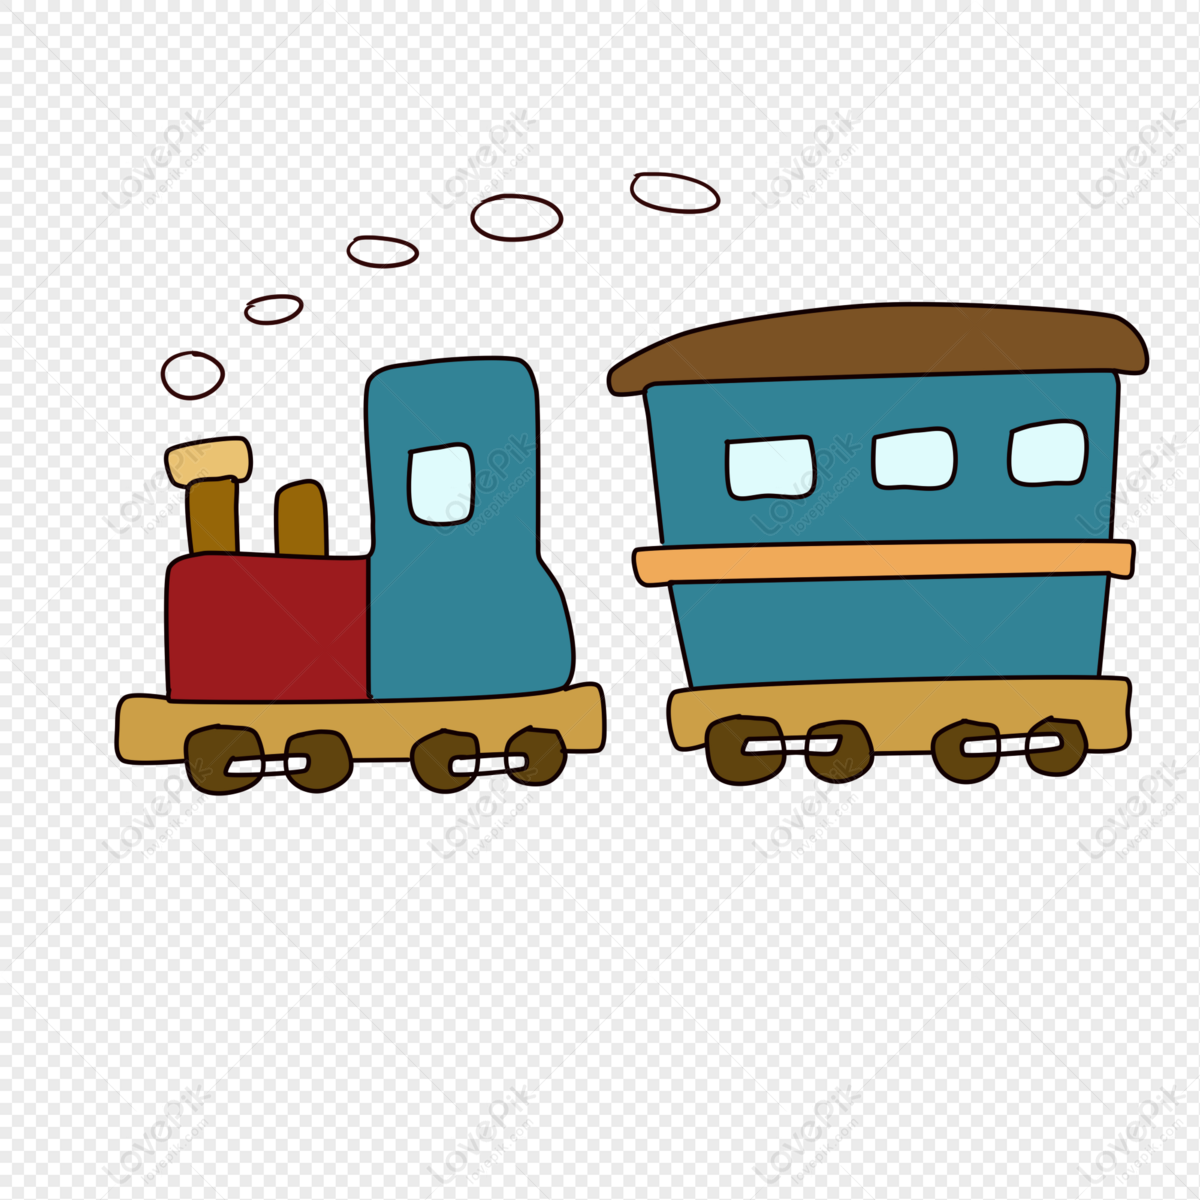 Cartoon Little Train PNG Transparent Image And Clipart Image For Free  Download - Lovepik | 401332807